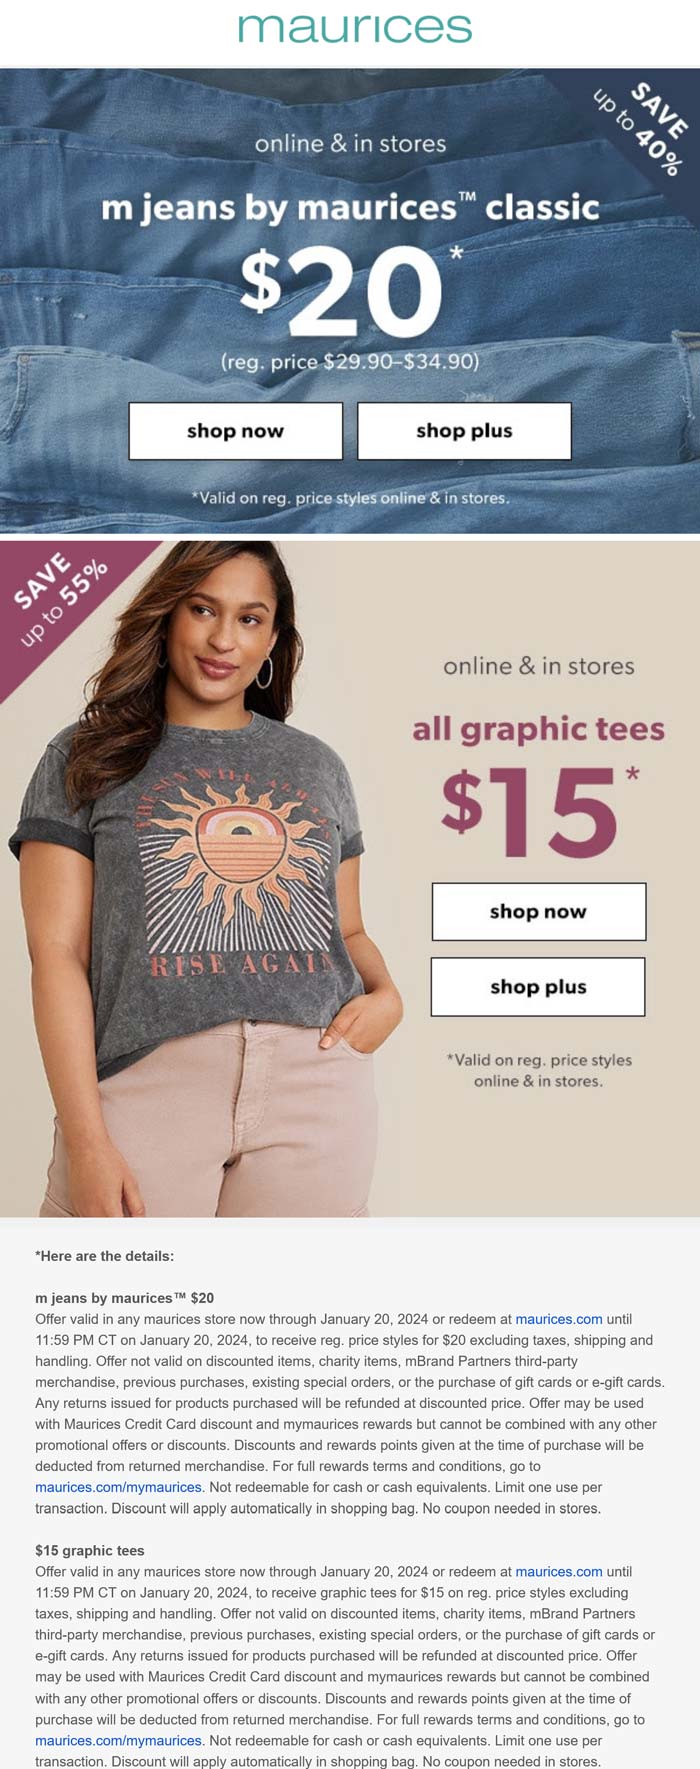 $20 m jeans today at Maurices, ditto online #maurices